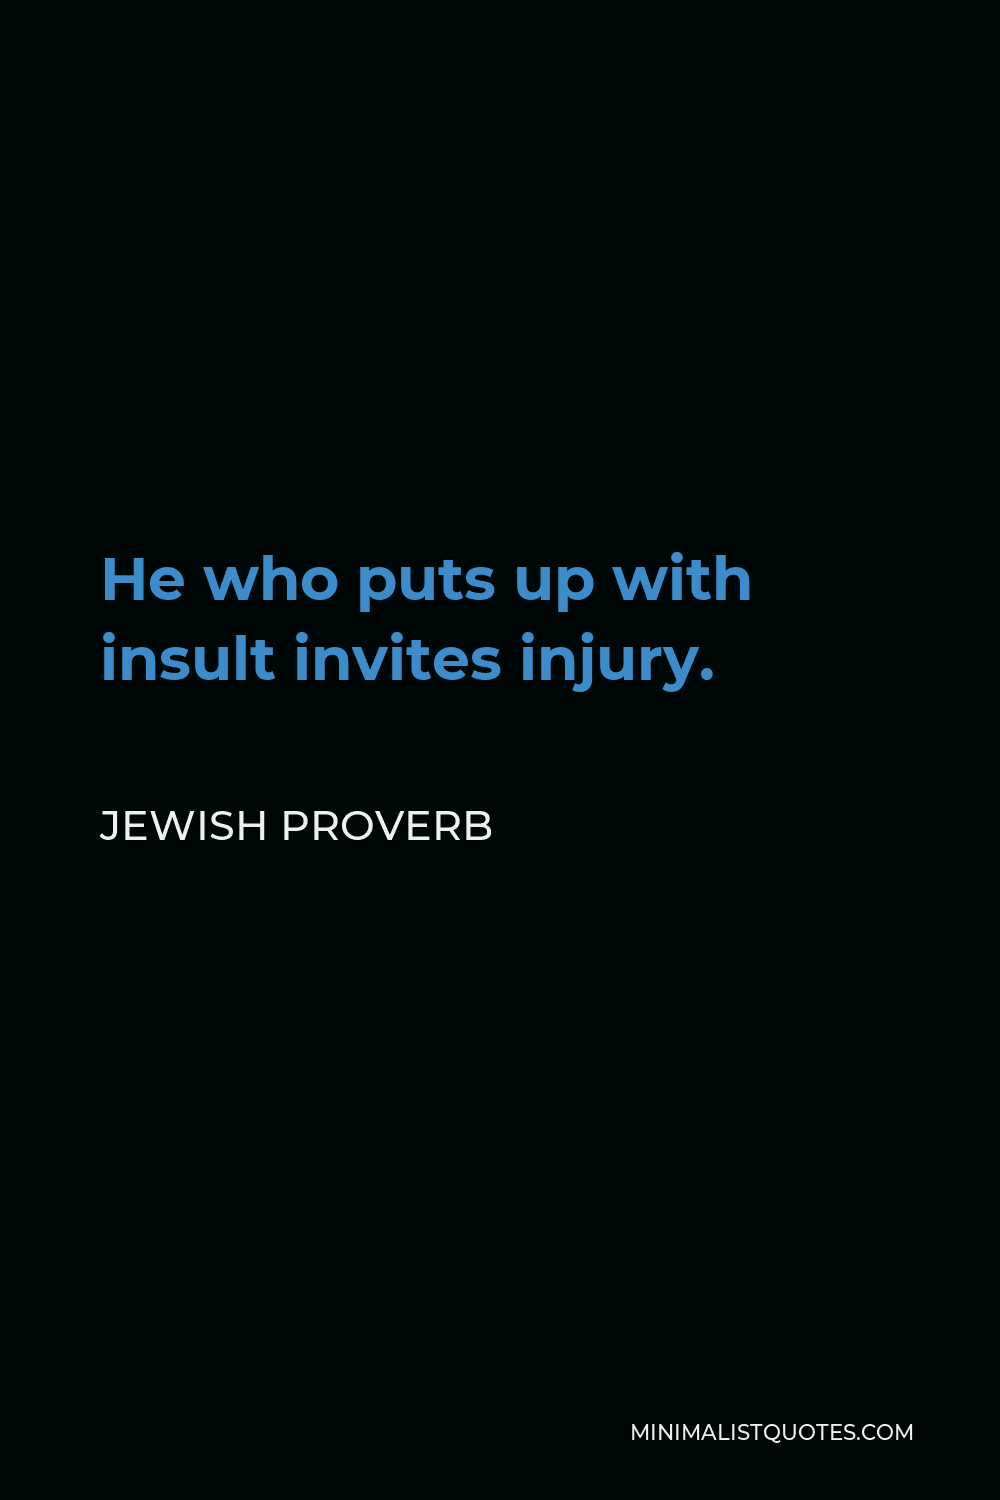 Jewish Proverb Quote - He who puts up with insult invites injury.